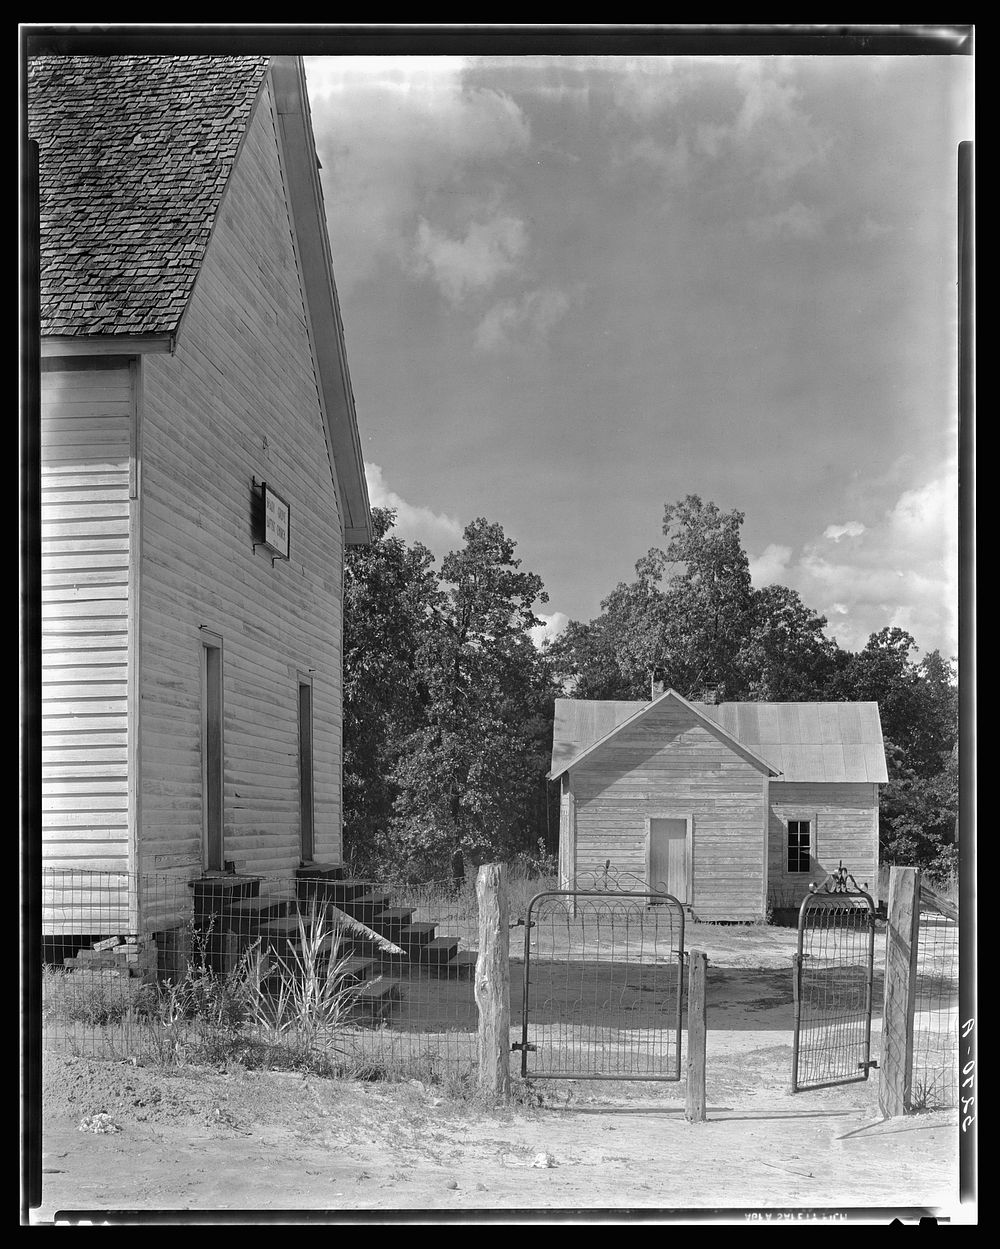 Shady Grove Baptist Church. Alabama or Tennessee. Sourced from the Library of Congress.